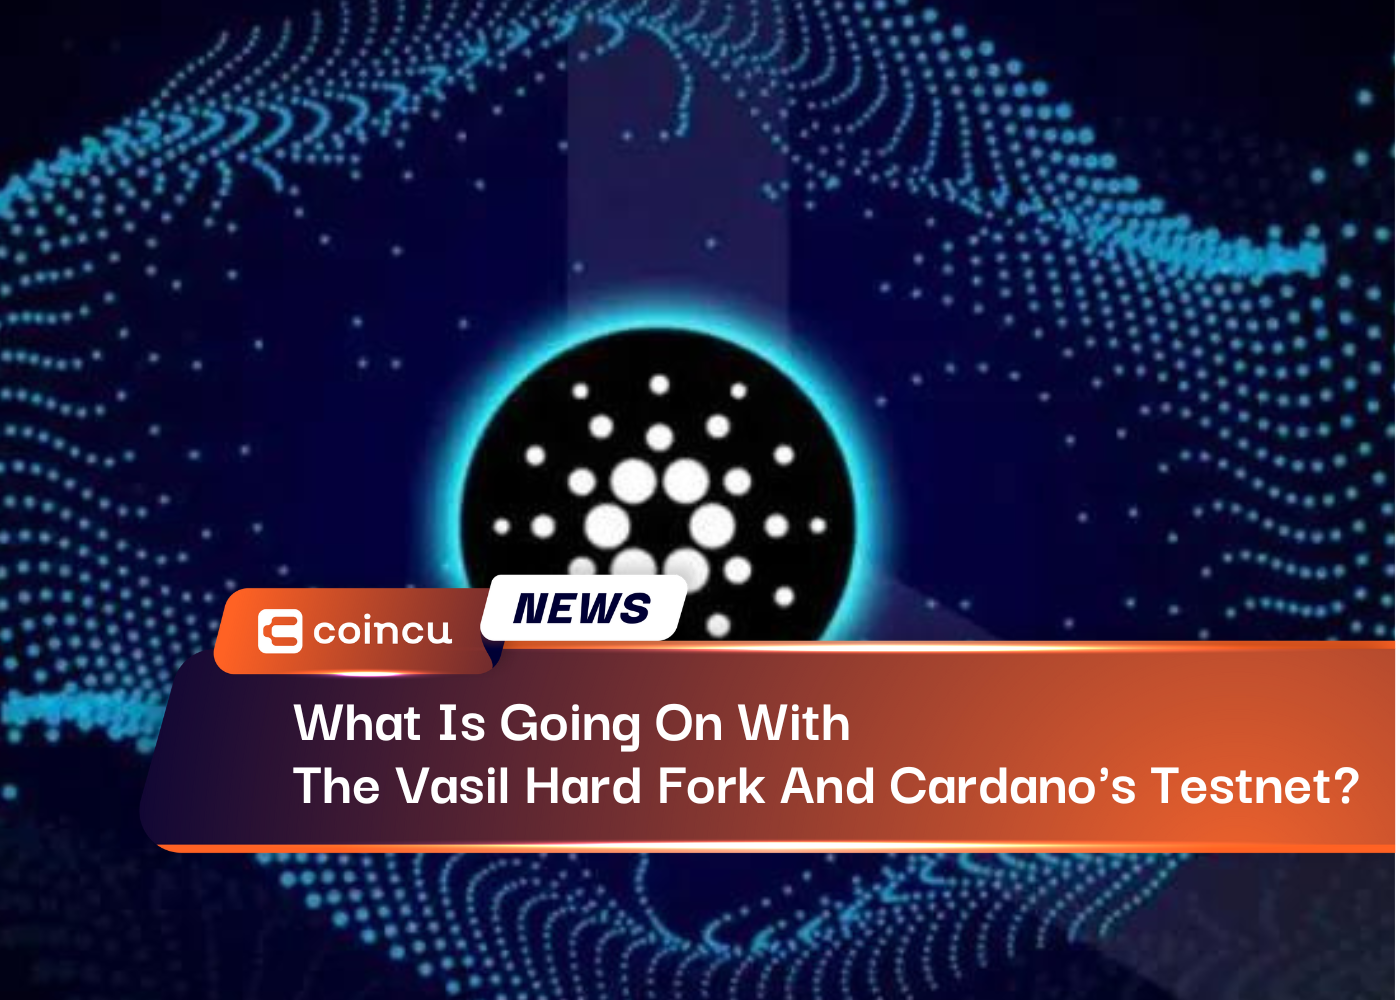 What Is Going On With The Vasil Hard Fork And Cardano’s Testnet?